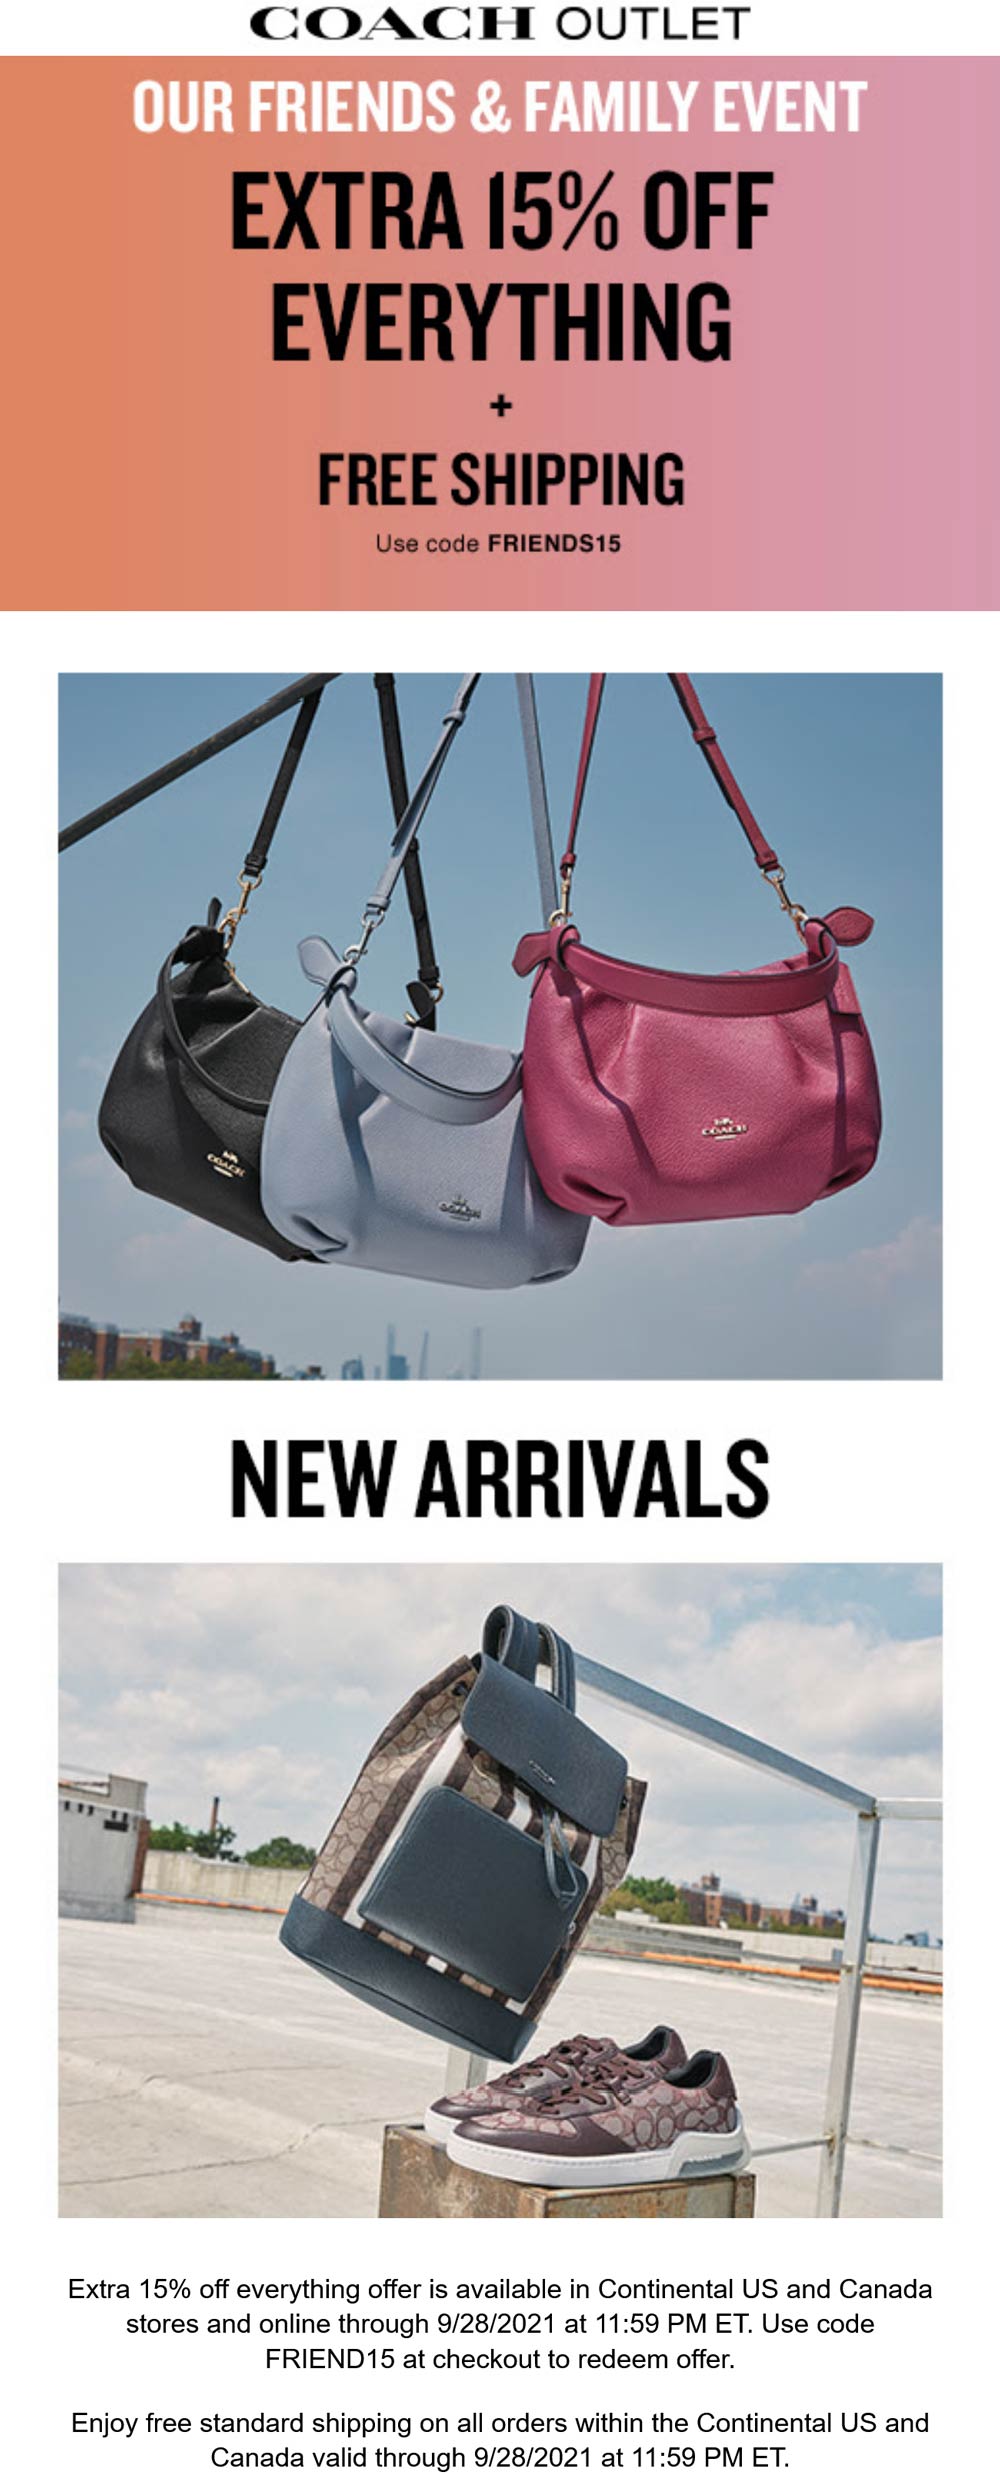 Extra 15% off everything at Coach Outlet via promo code FRIEND15 # coachoutlet | The Coupons App®